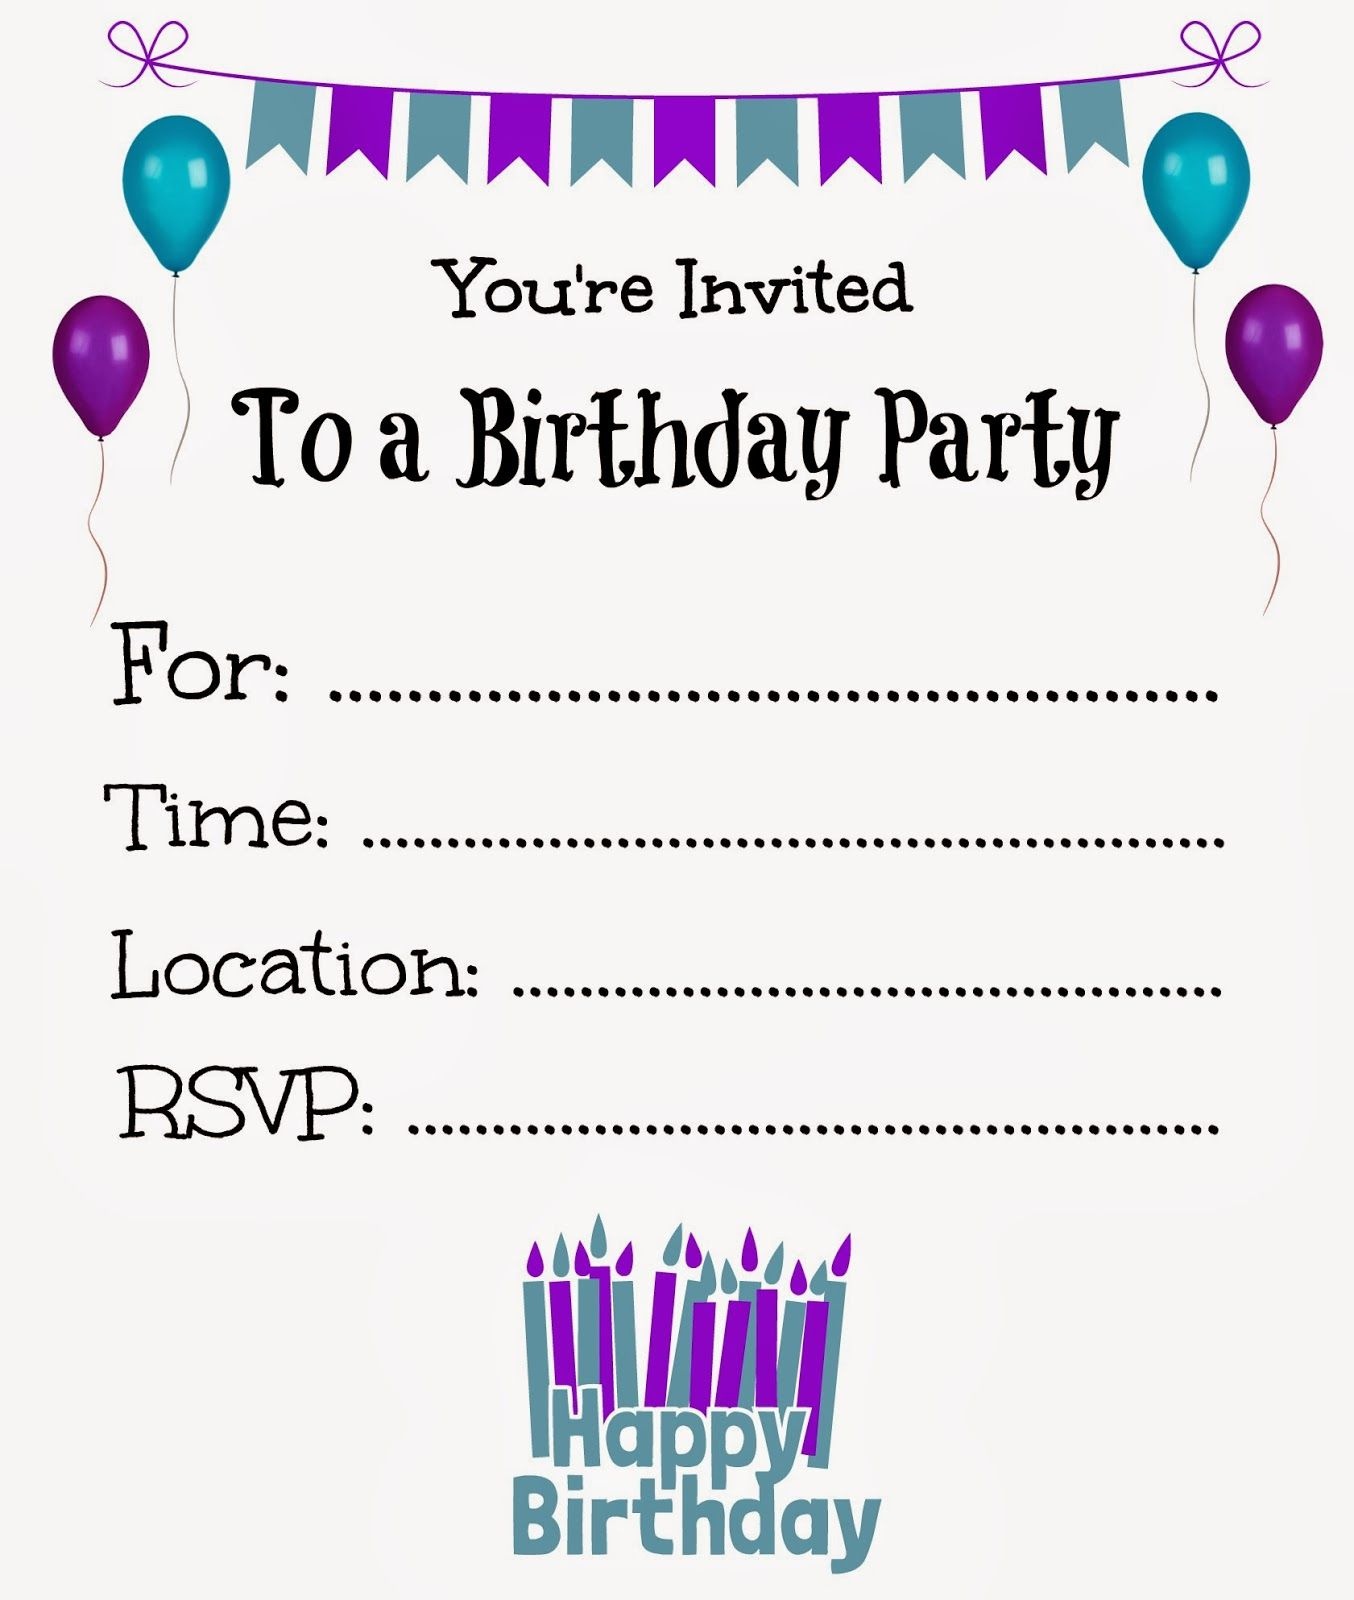 Free Printable Birthday Invitations For Kids #freeprintables - Free Printable Birthday Invitations With Pictures